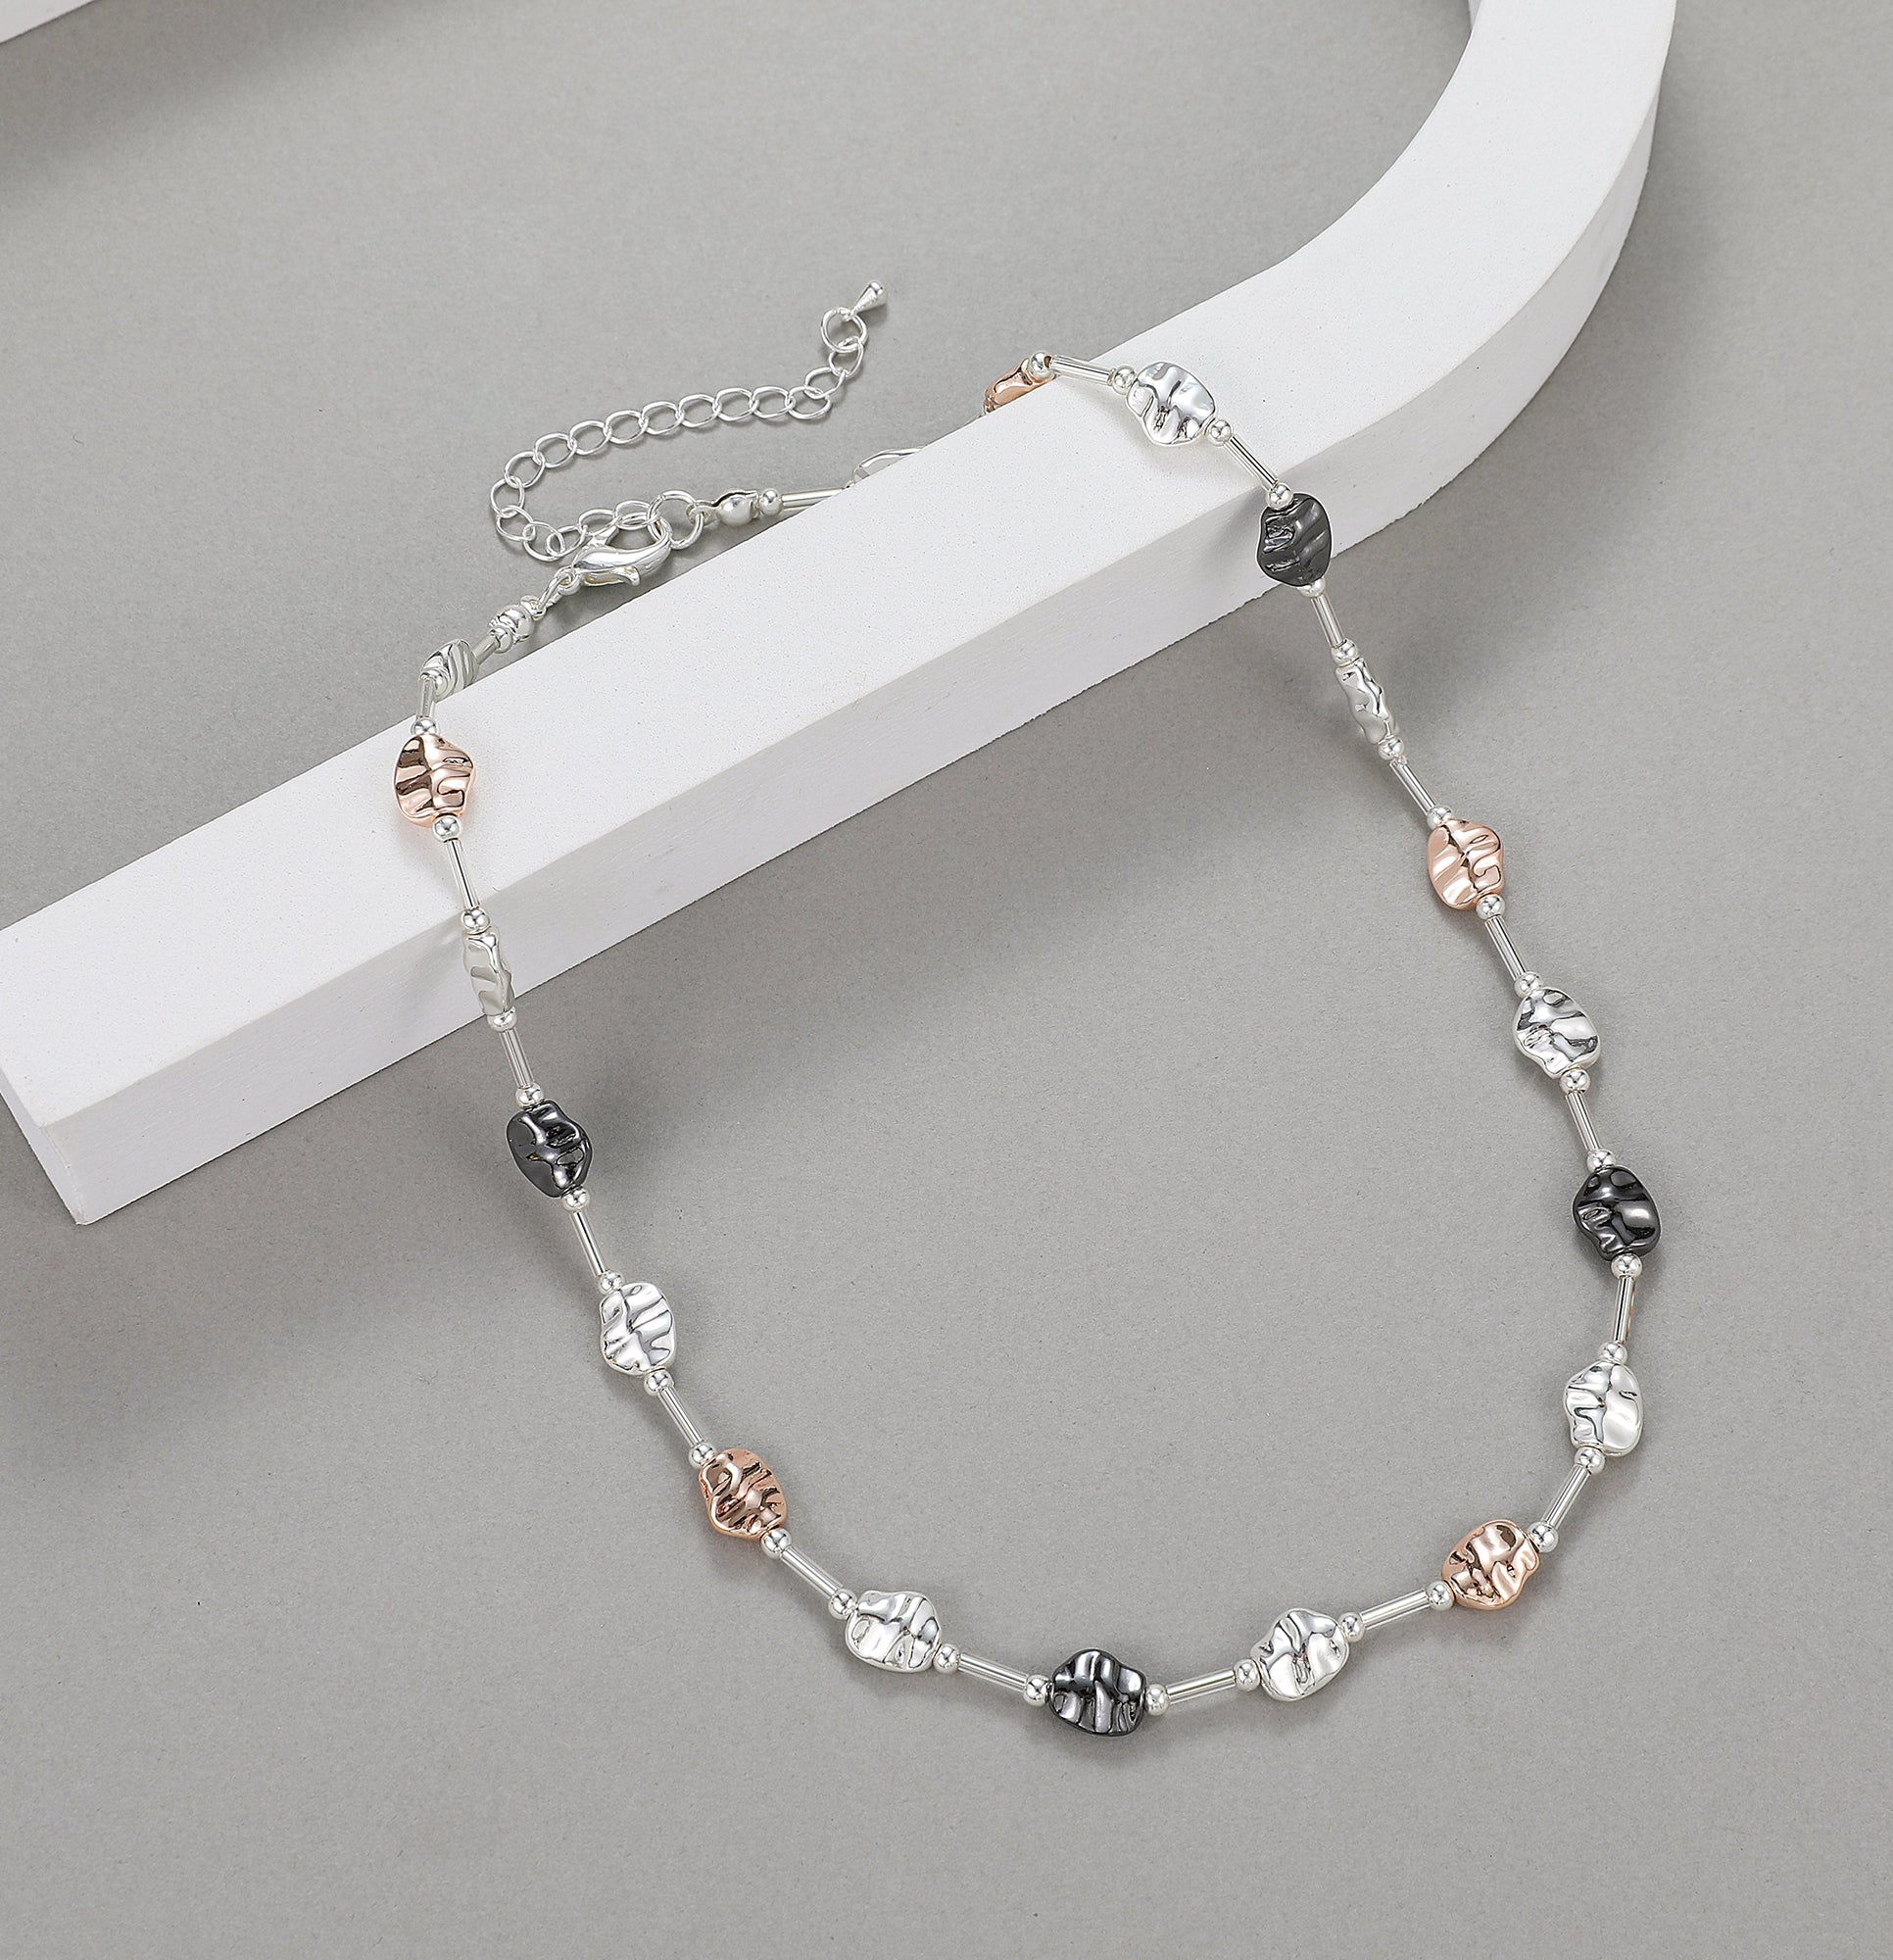 Short necklace, with rose gold, silver and pewter nuggets - on a silver chain